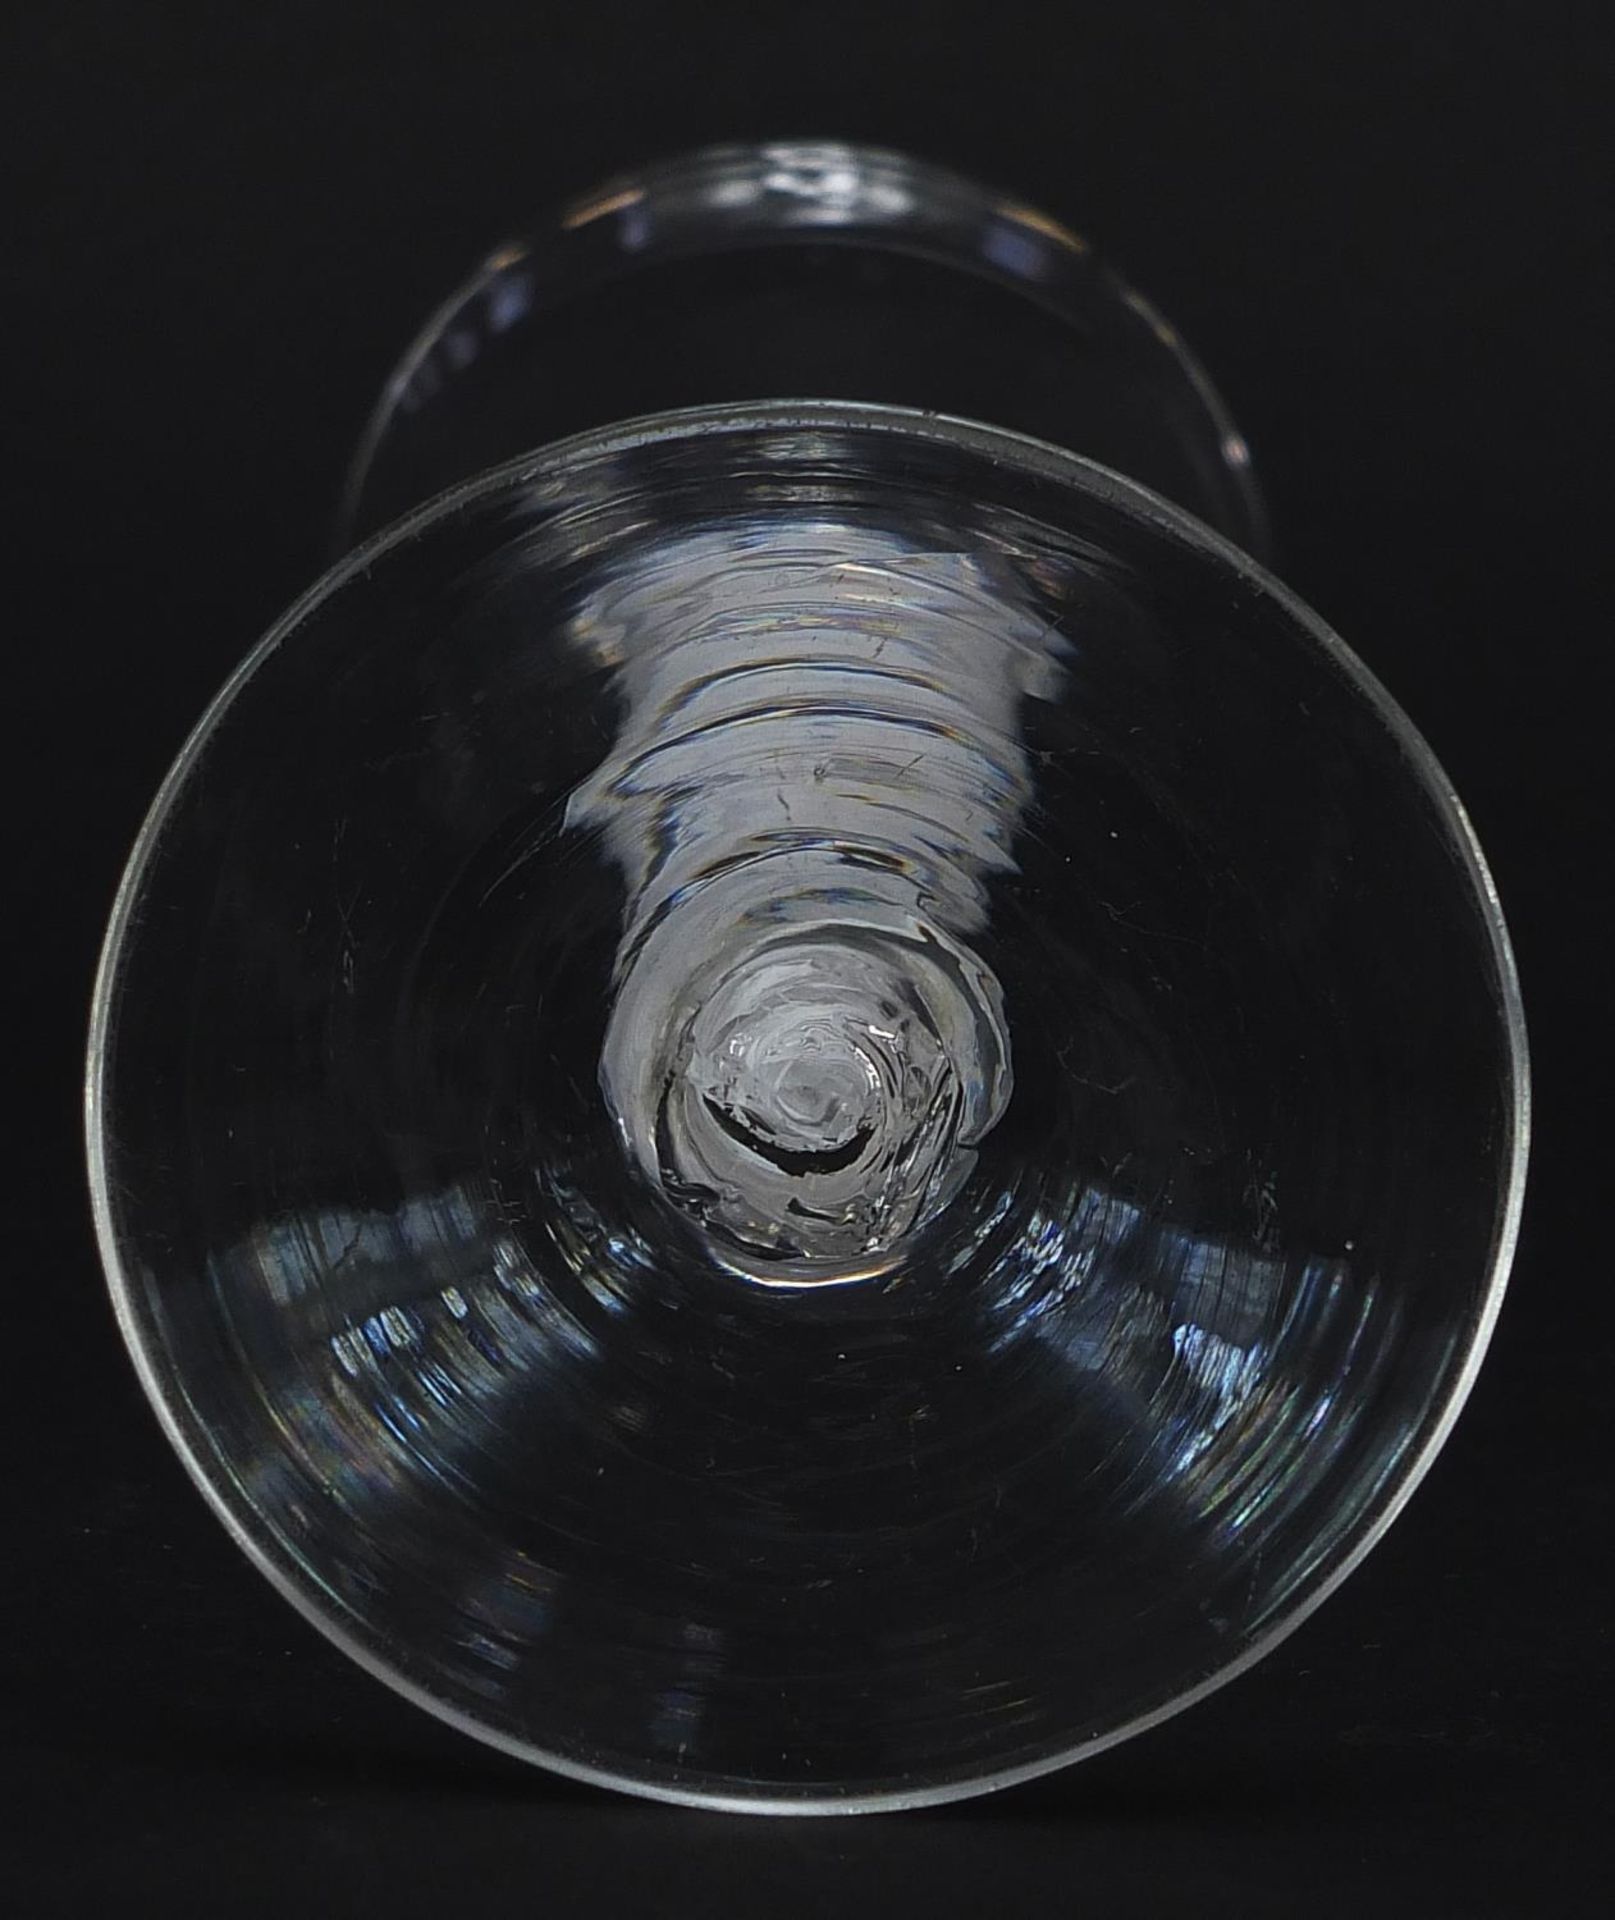 18th century wine glass with bell shaped bowl and multiple opaque twist stem, 16cm high - Image 3 of 3